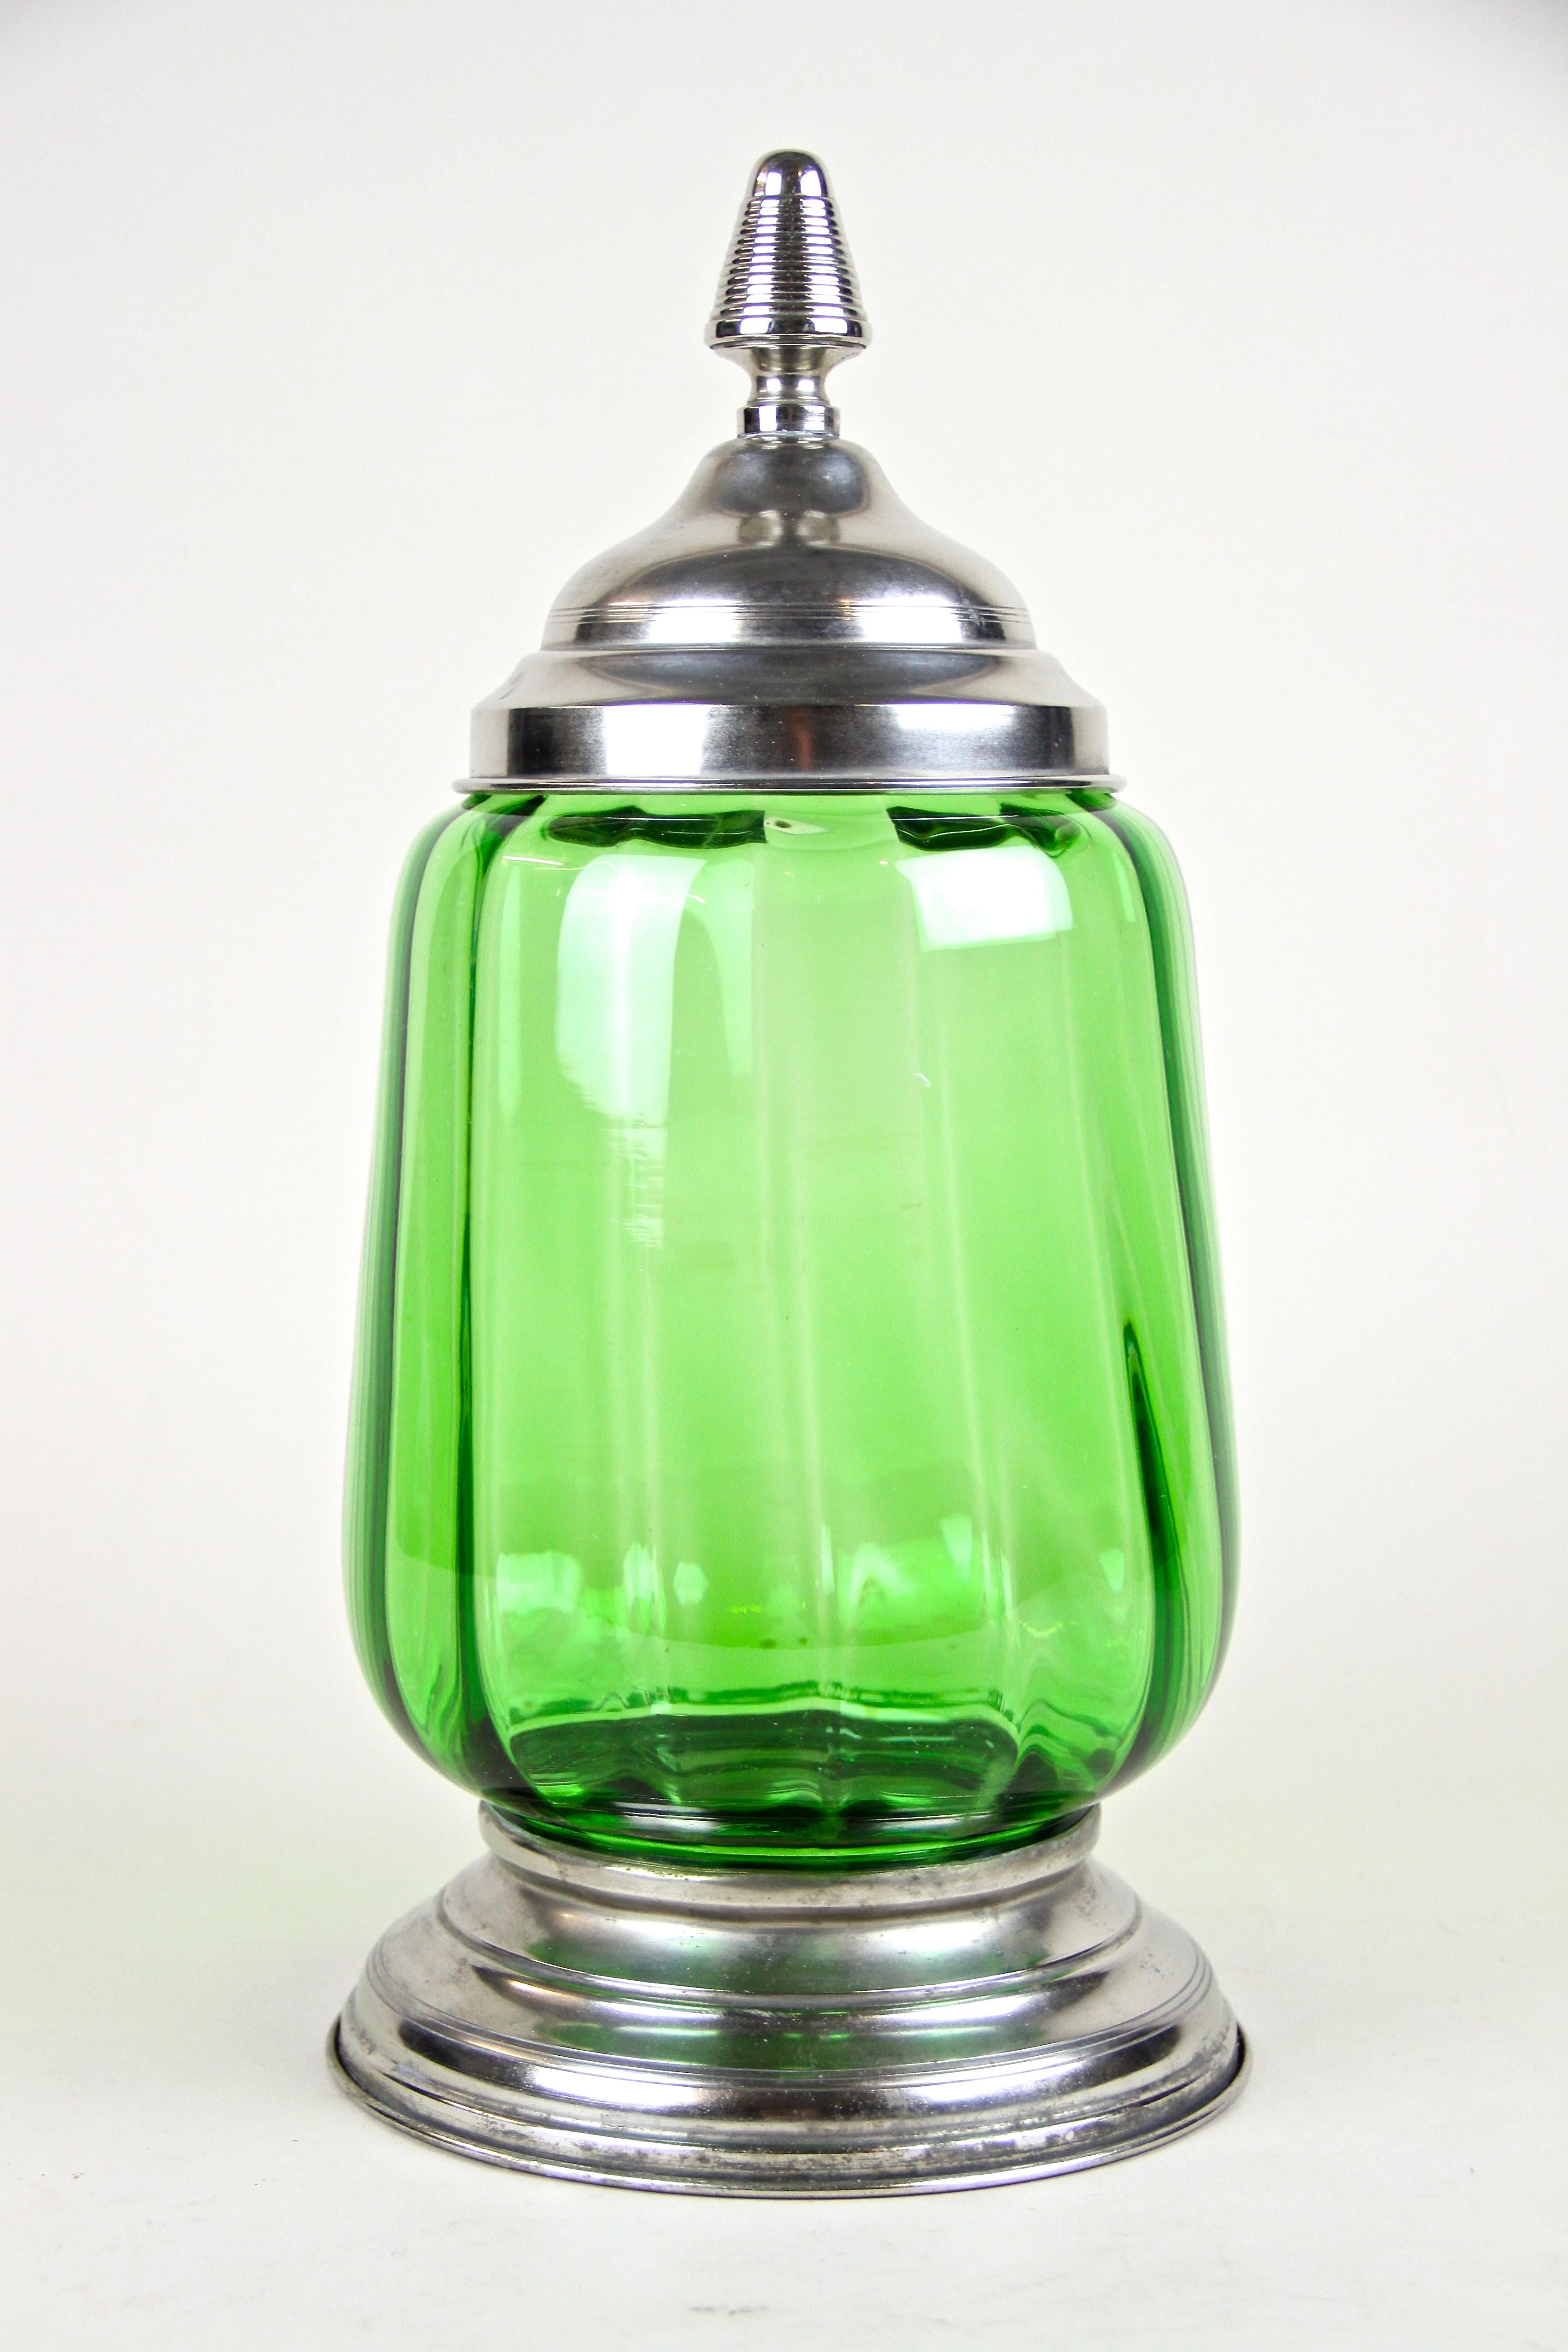 Lovely Art Deco glass jar or punch bowl from the early period around 1920 in Austria. This early 20th century green jar impresses with an artfully shaped, slightly twisted glass body embedded into a beautiful base. The removable lid with its unusual